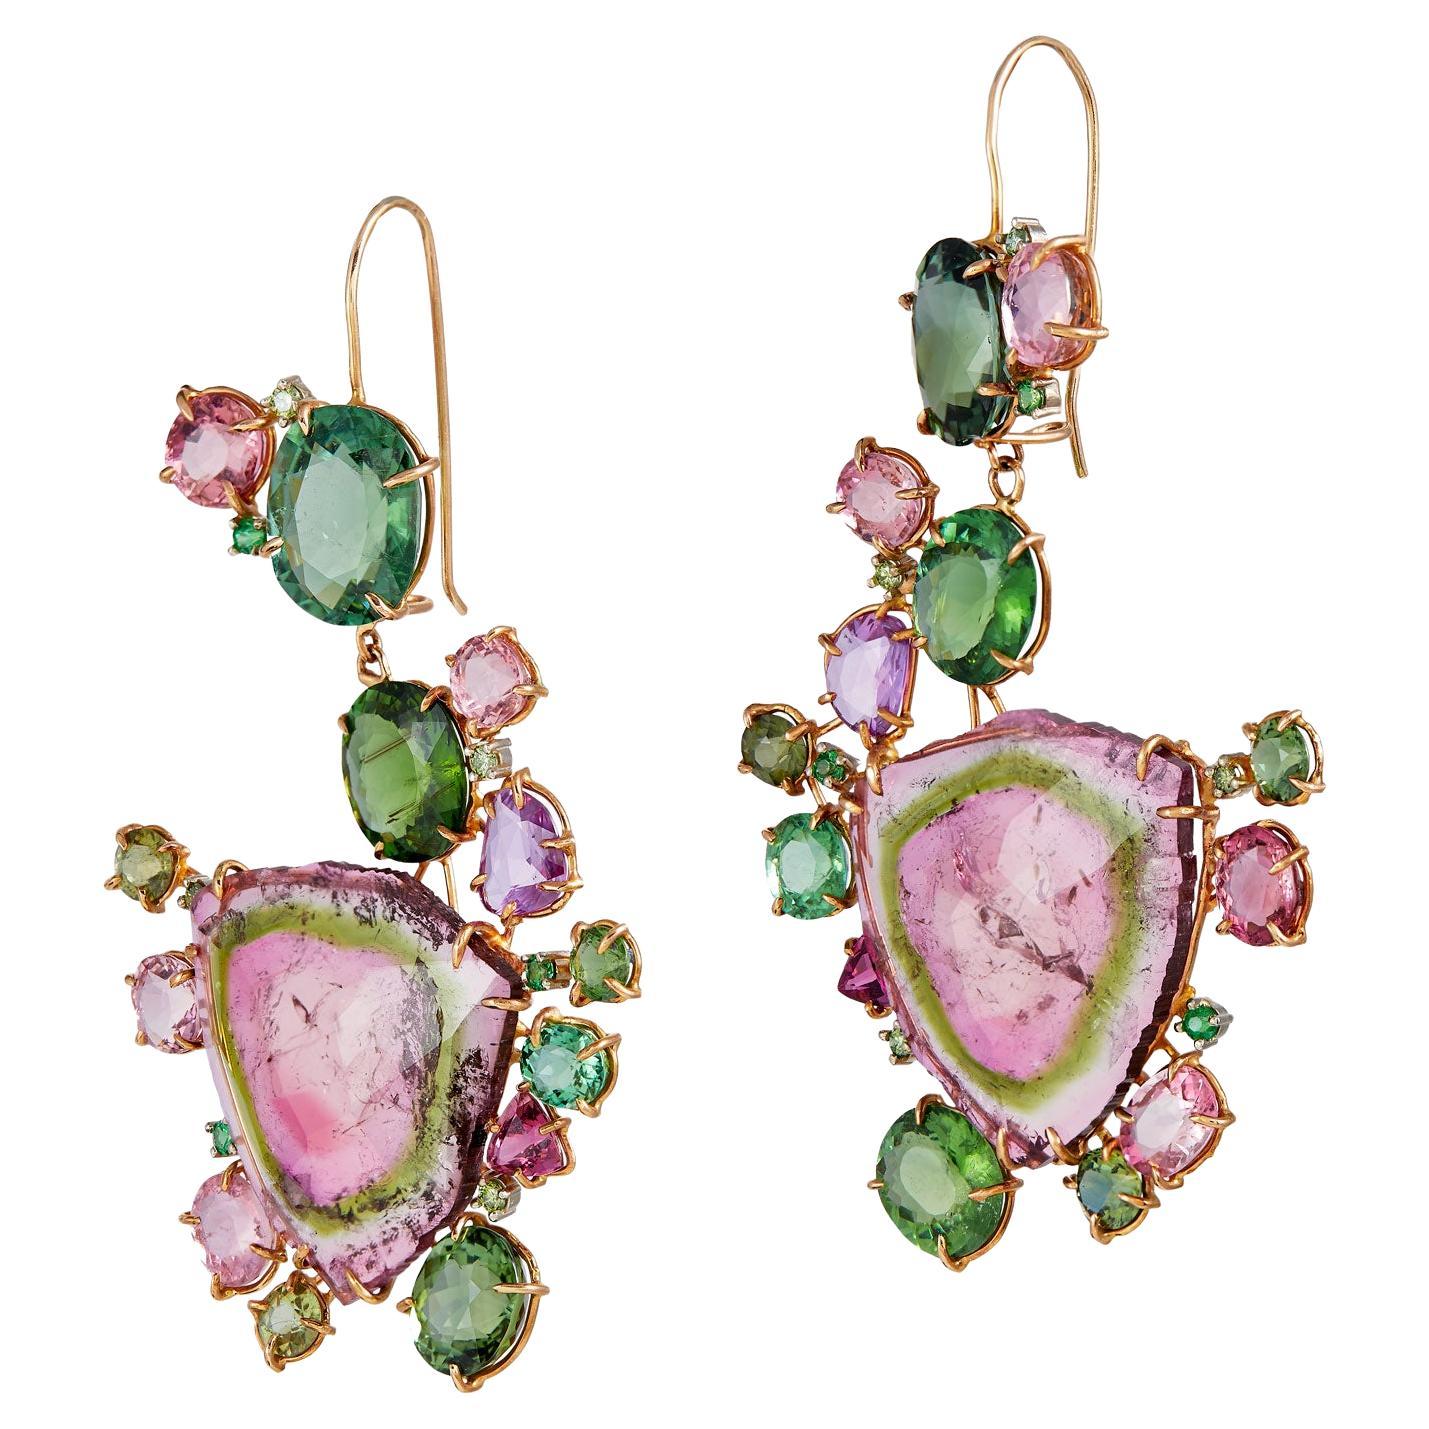 Hand Made Tourmaline slice earrings in 18k rose gold with rose cut sliced watermelon tourmaline centers.  Each earring was specially fashioned by hand with custom settings and french hook backs. Total watermelon tourmaline weight approx. 95.68 CTS ,